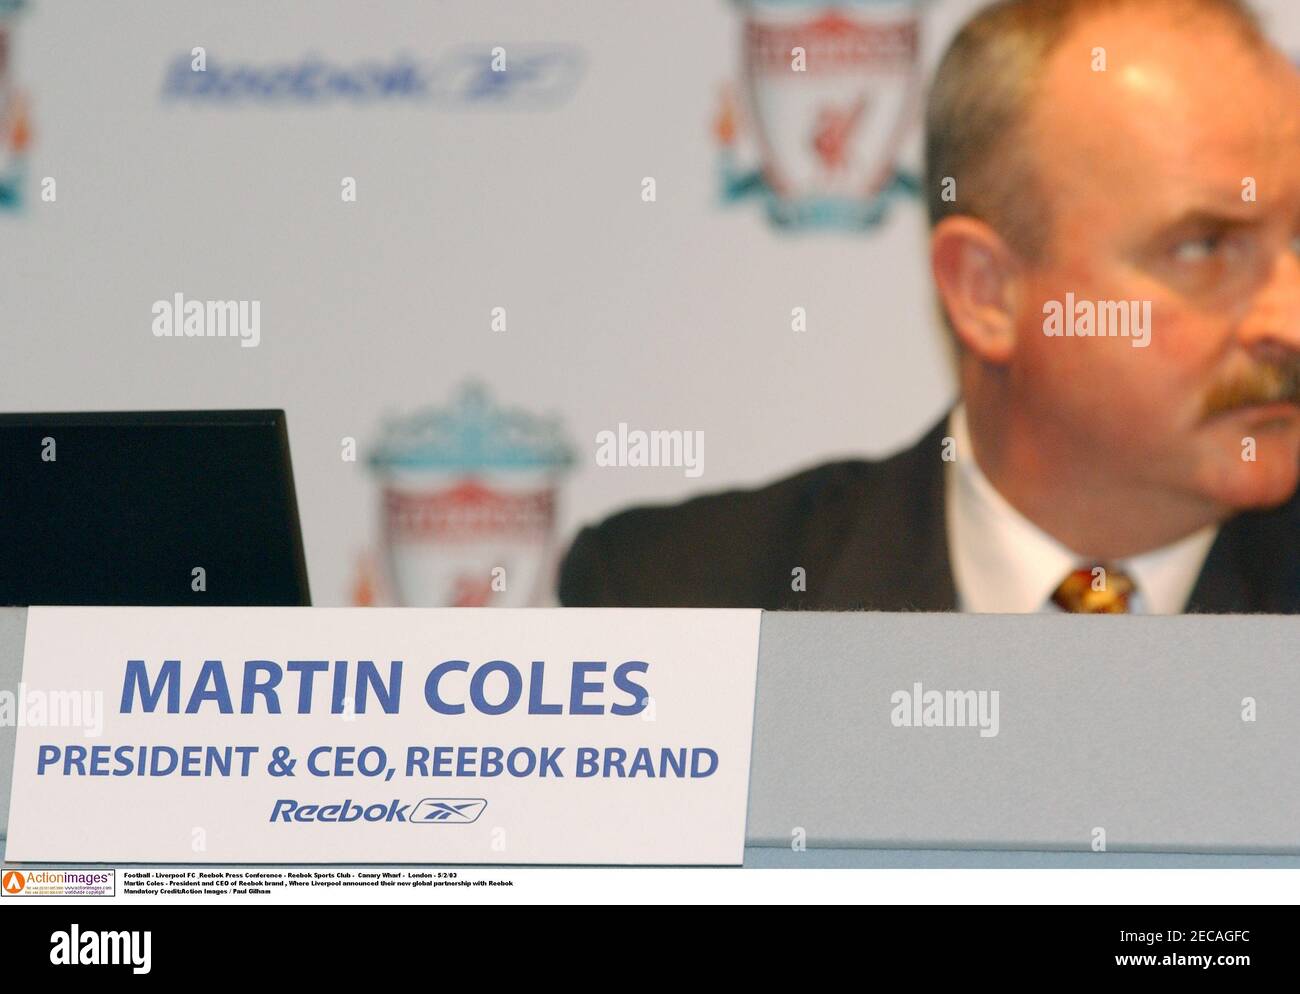 Football - Liverpool FC & Reebok Press Conference - Reebok Sports Club - Canary  Wharf - London - 5/2/03 Martin Coles - President and CEO of Reebok brand ,  Where Liverpool announced